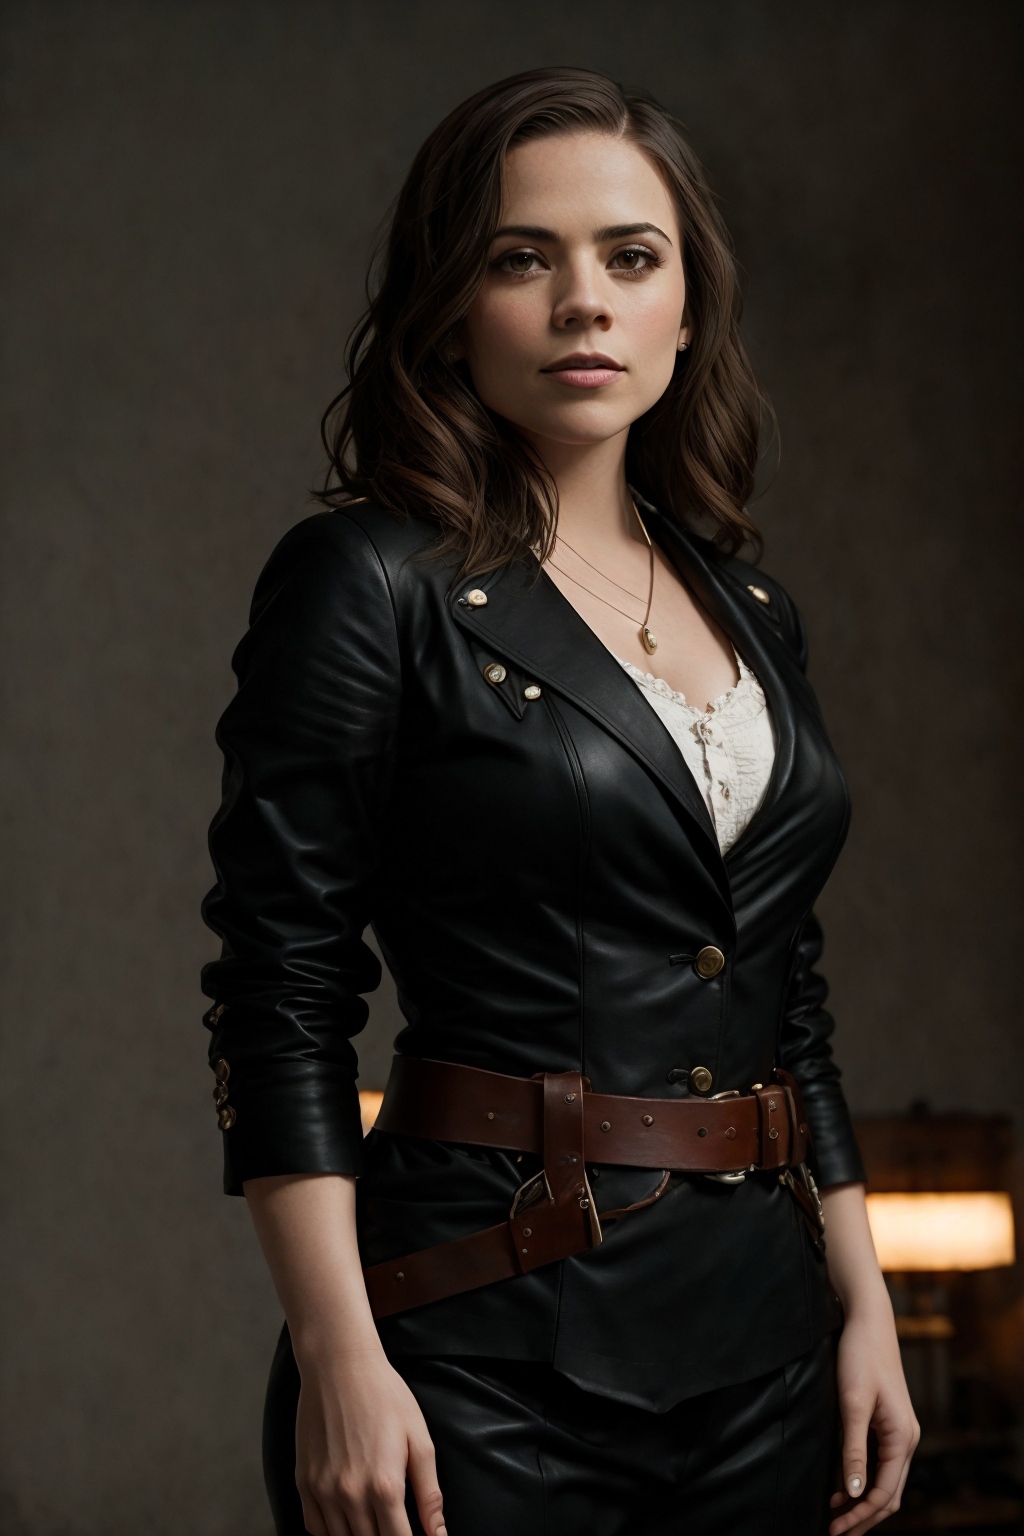 Hayley Atwell [Embedding] image by ngsm000